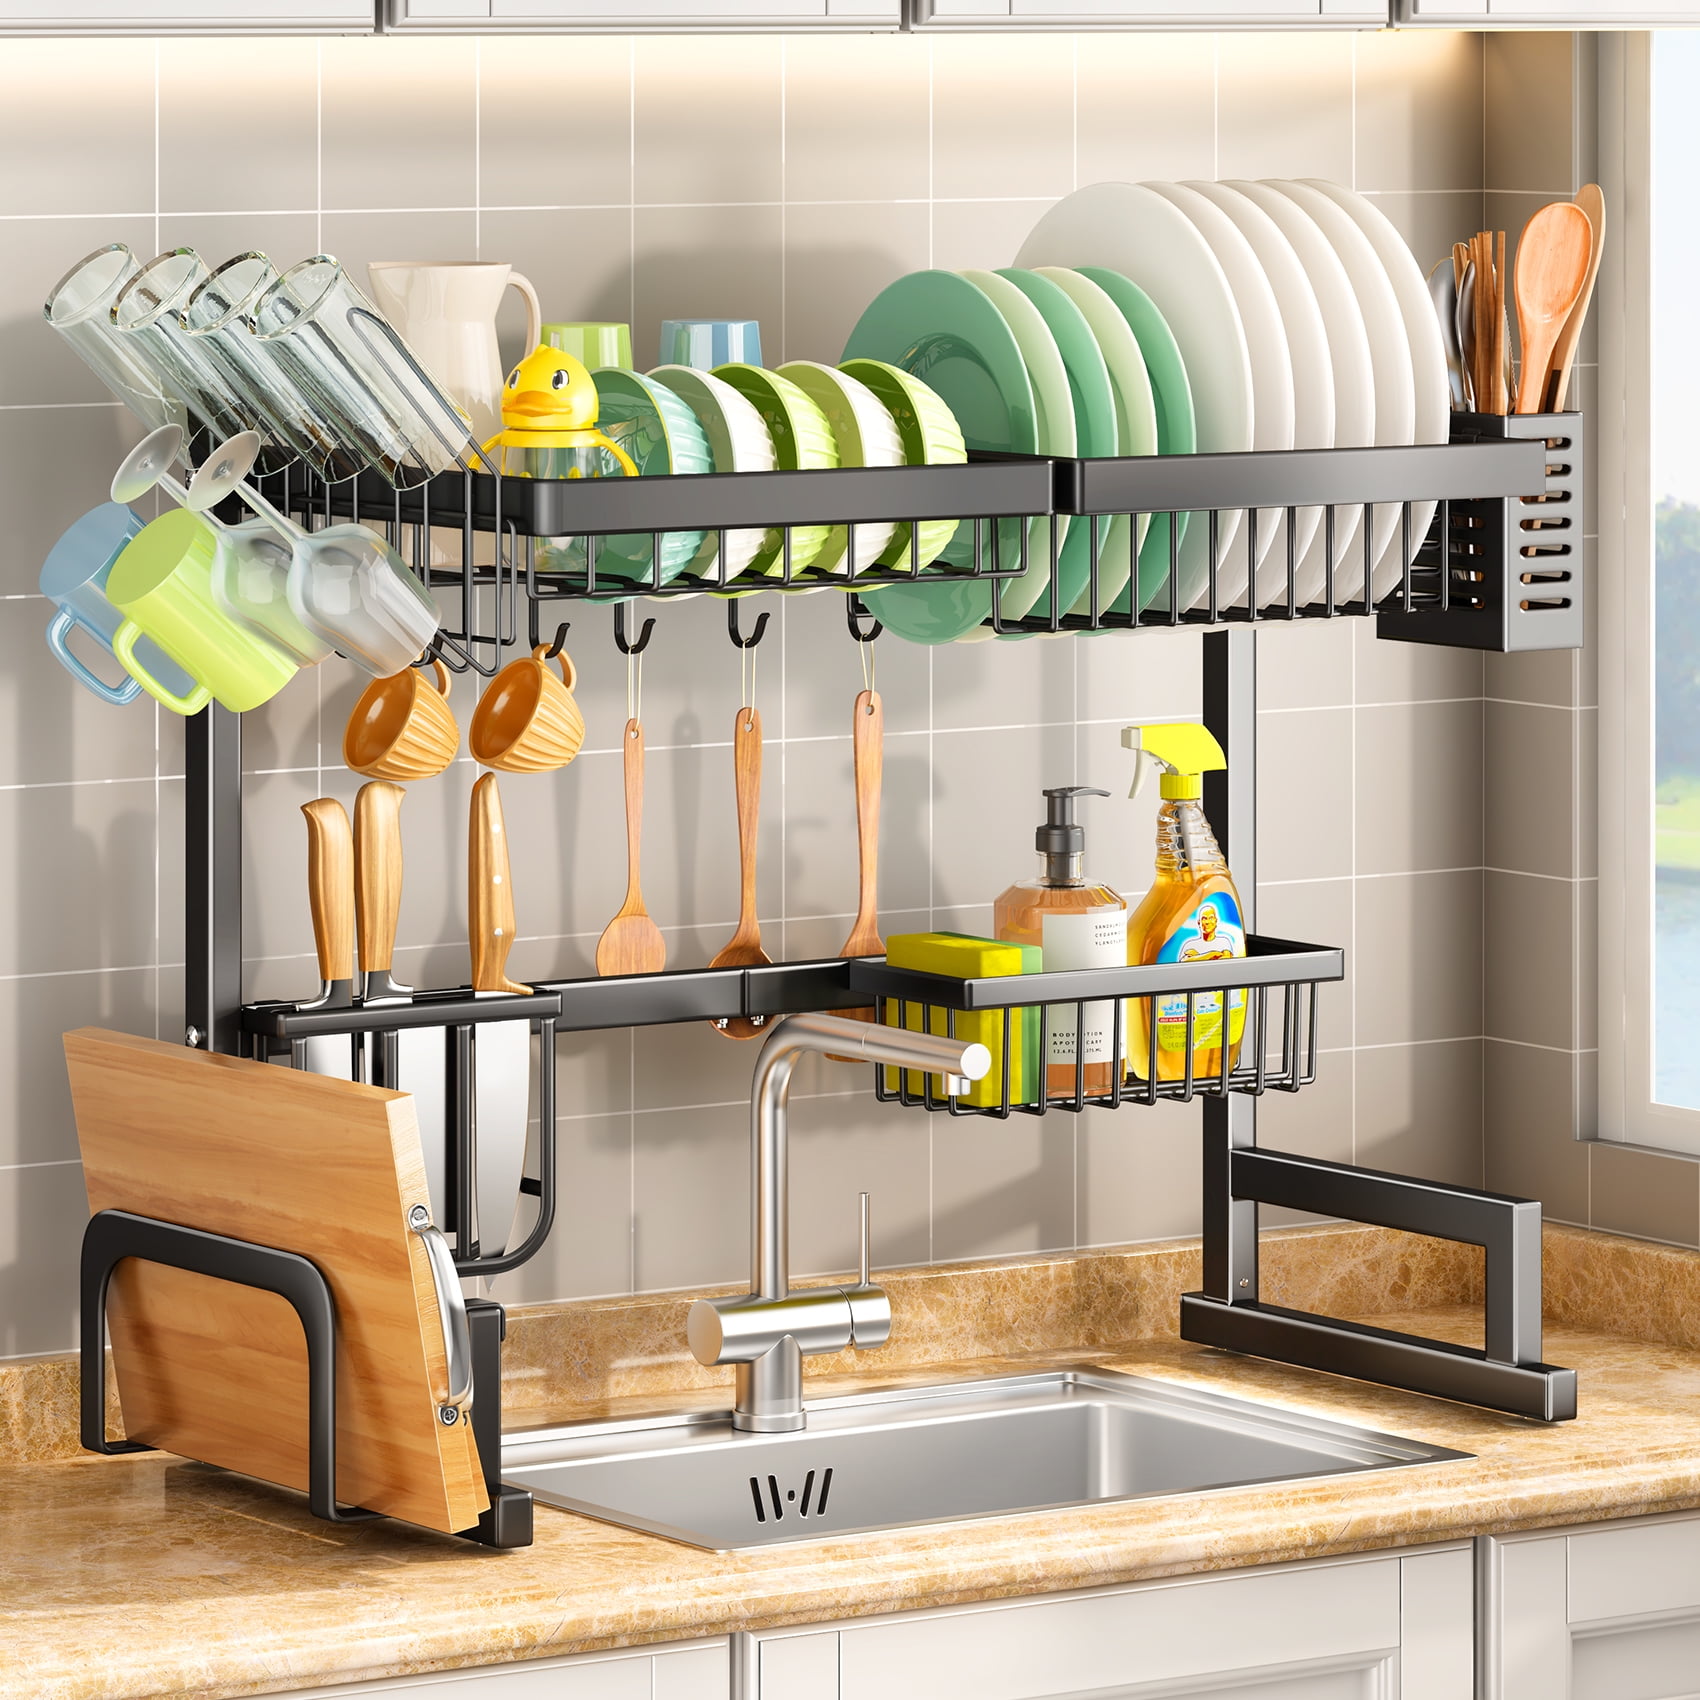 SAYZH Over The Sink Dish Drying Rack, Width Adjustable (26.8 inch to 34.6 inch) 2 Tier Dish Rack Drainer for Kitchen Counter Organization and Storage